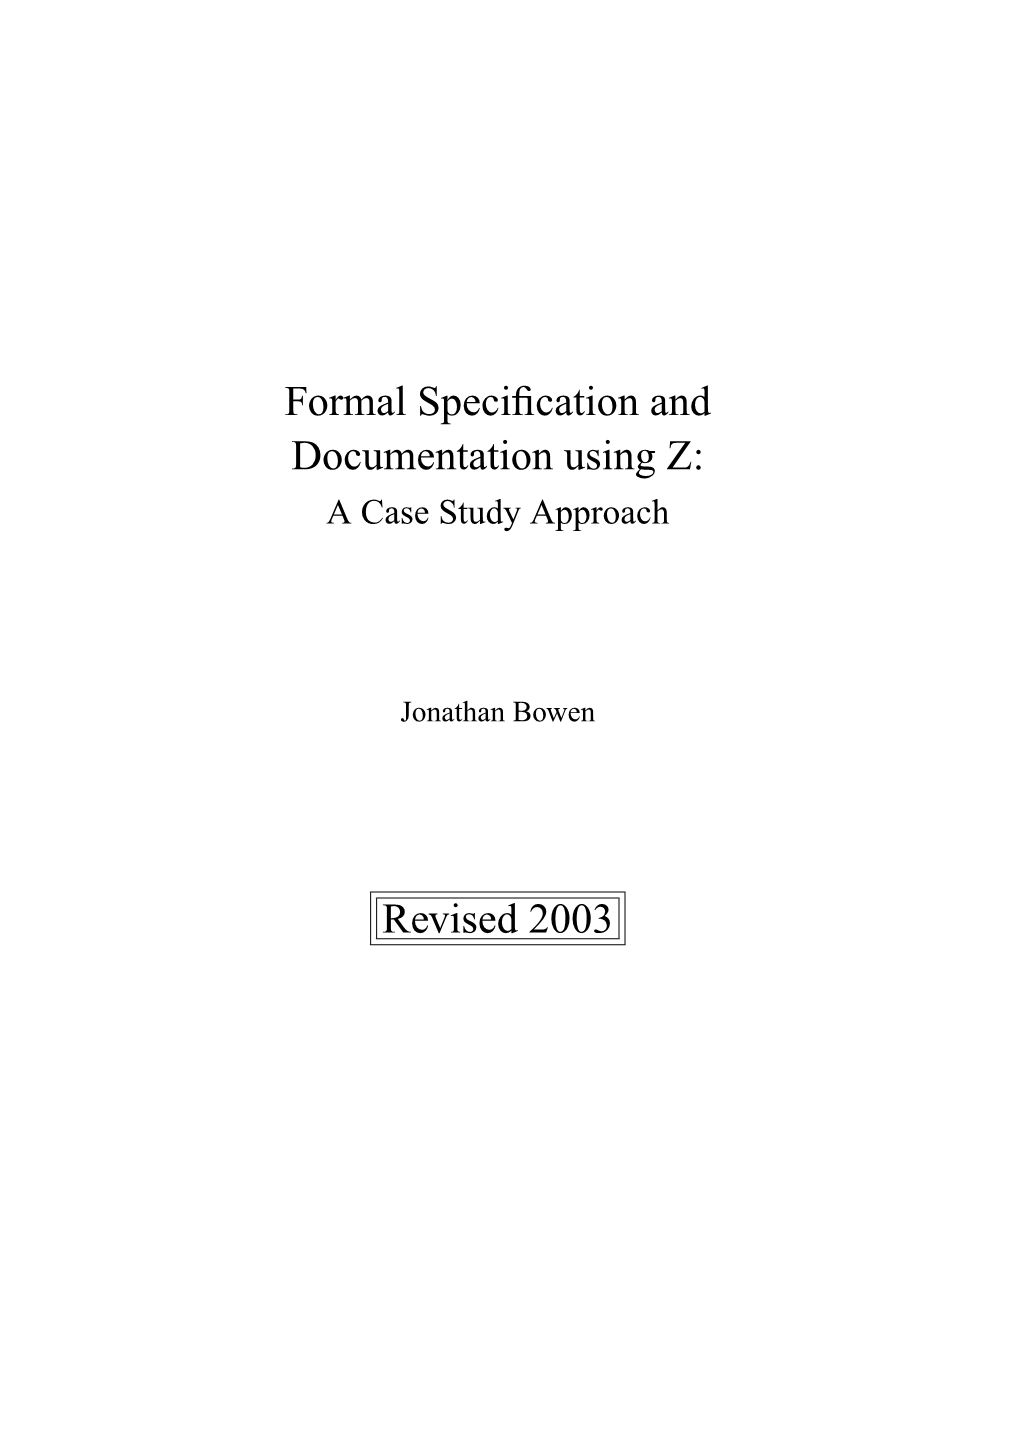 Formal Specification and Documentation Using Z